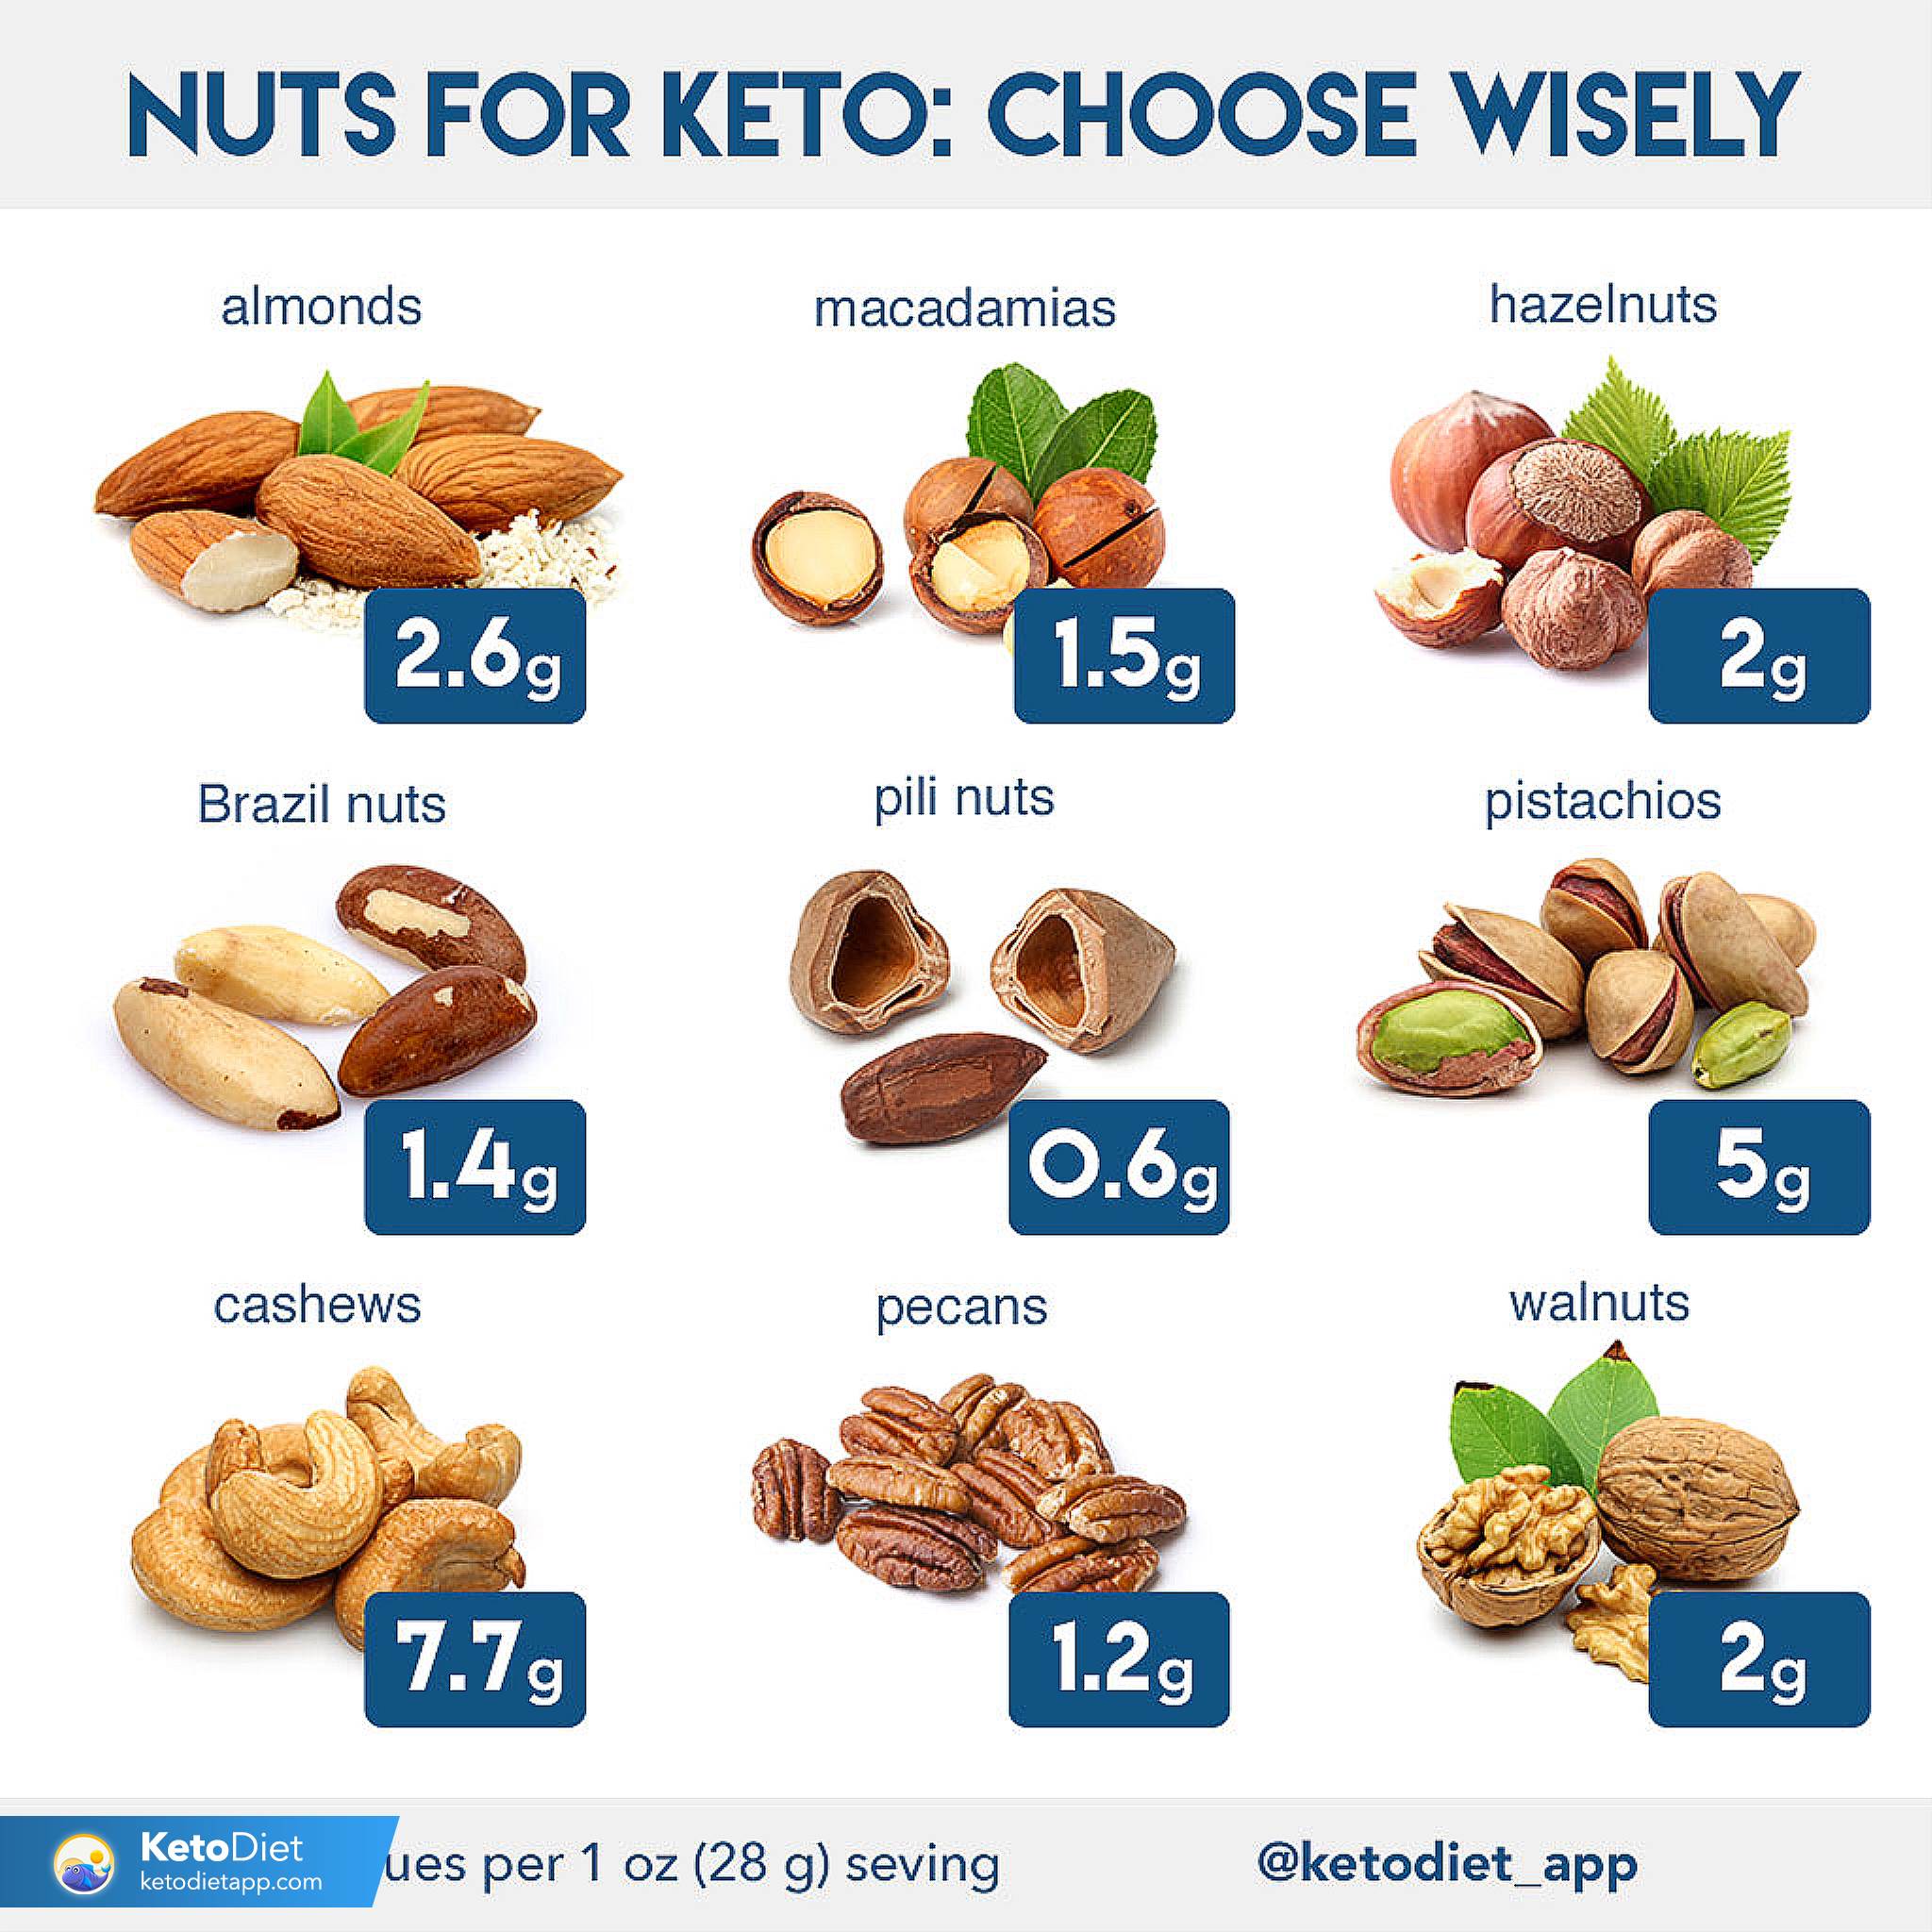 Nuts u0026 Seeds on a Ketogenic Diet: Eat or Avoid? | KetoDiet Blog